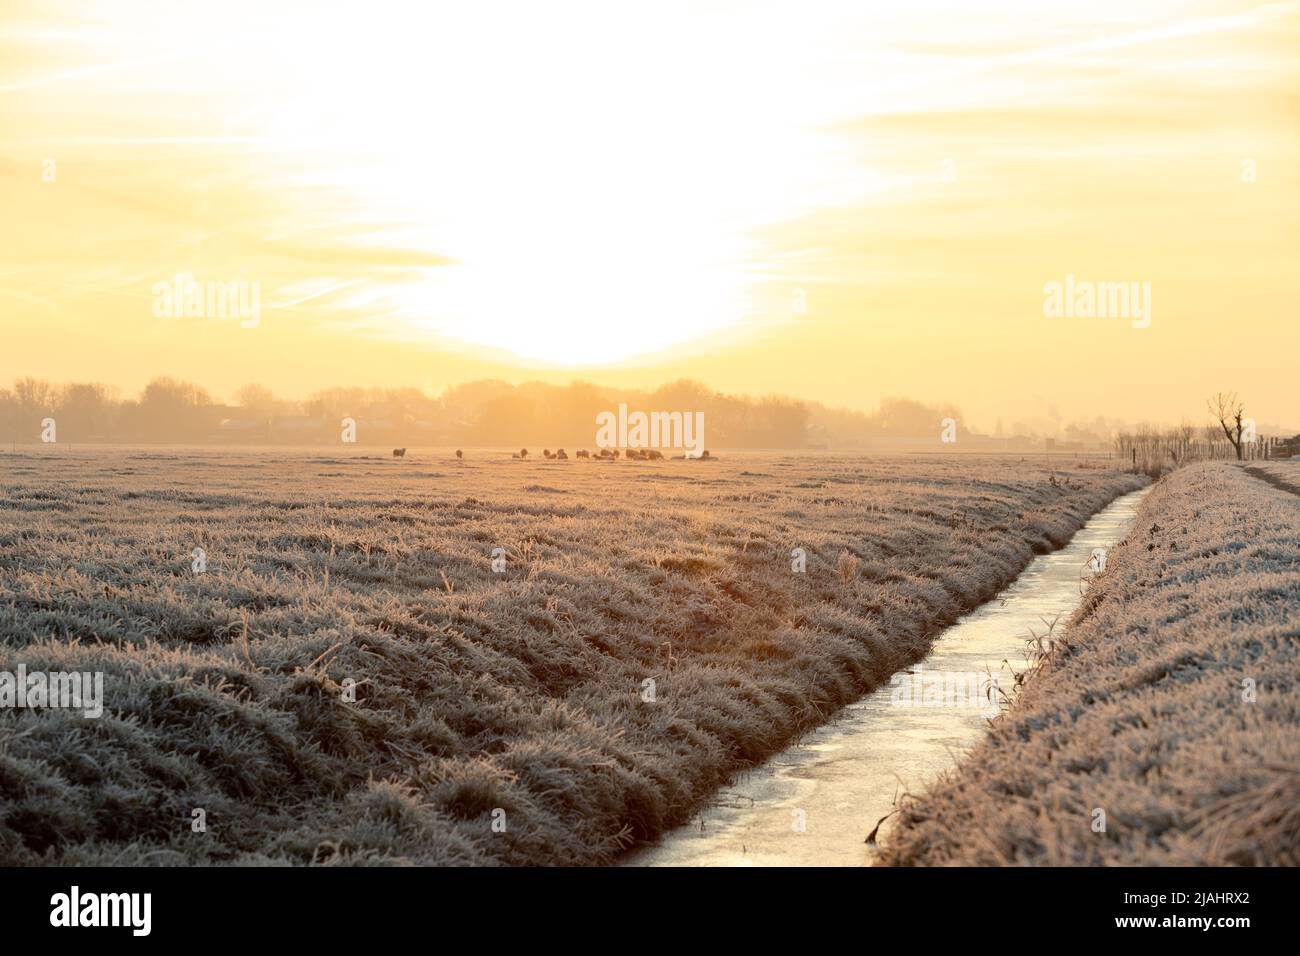 Sheep on the meadow eating grass in the herd during colorful sunrise or sunset. In Noordwijk, the Netherlands Stock Photo